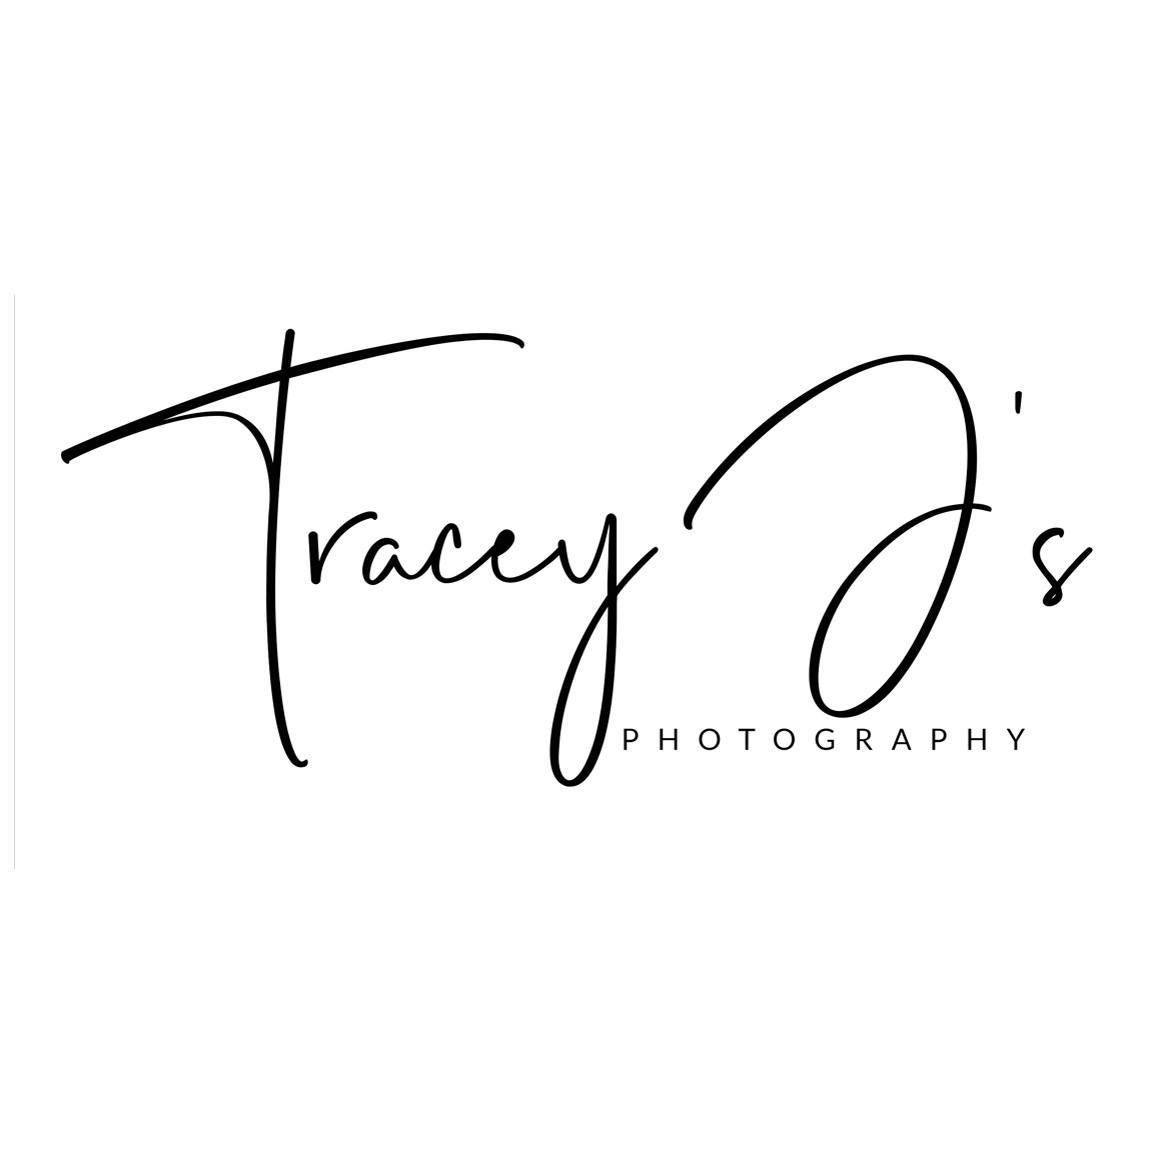 EXHIBITOR: Tracey J's Photography